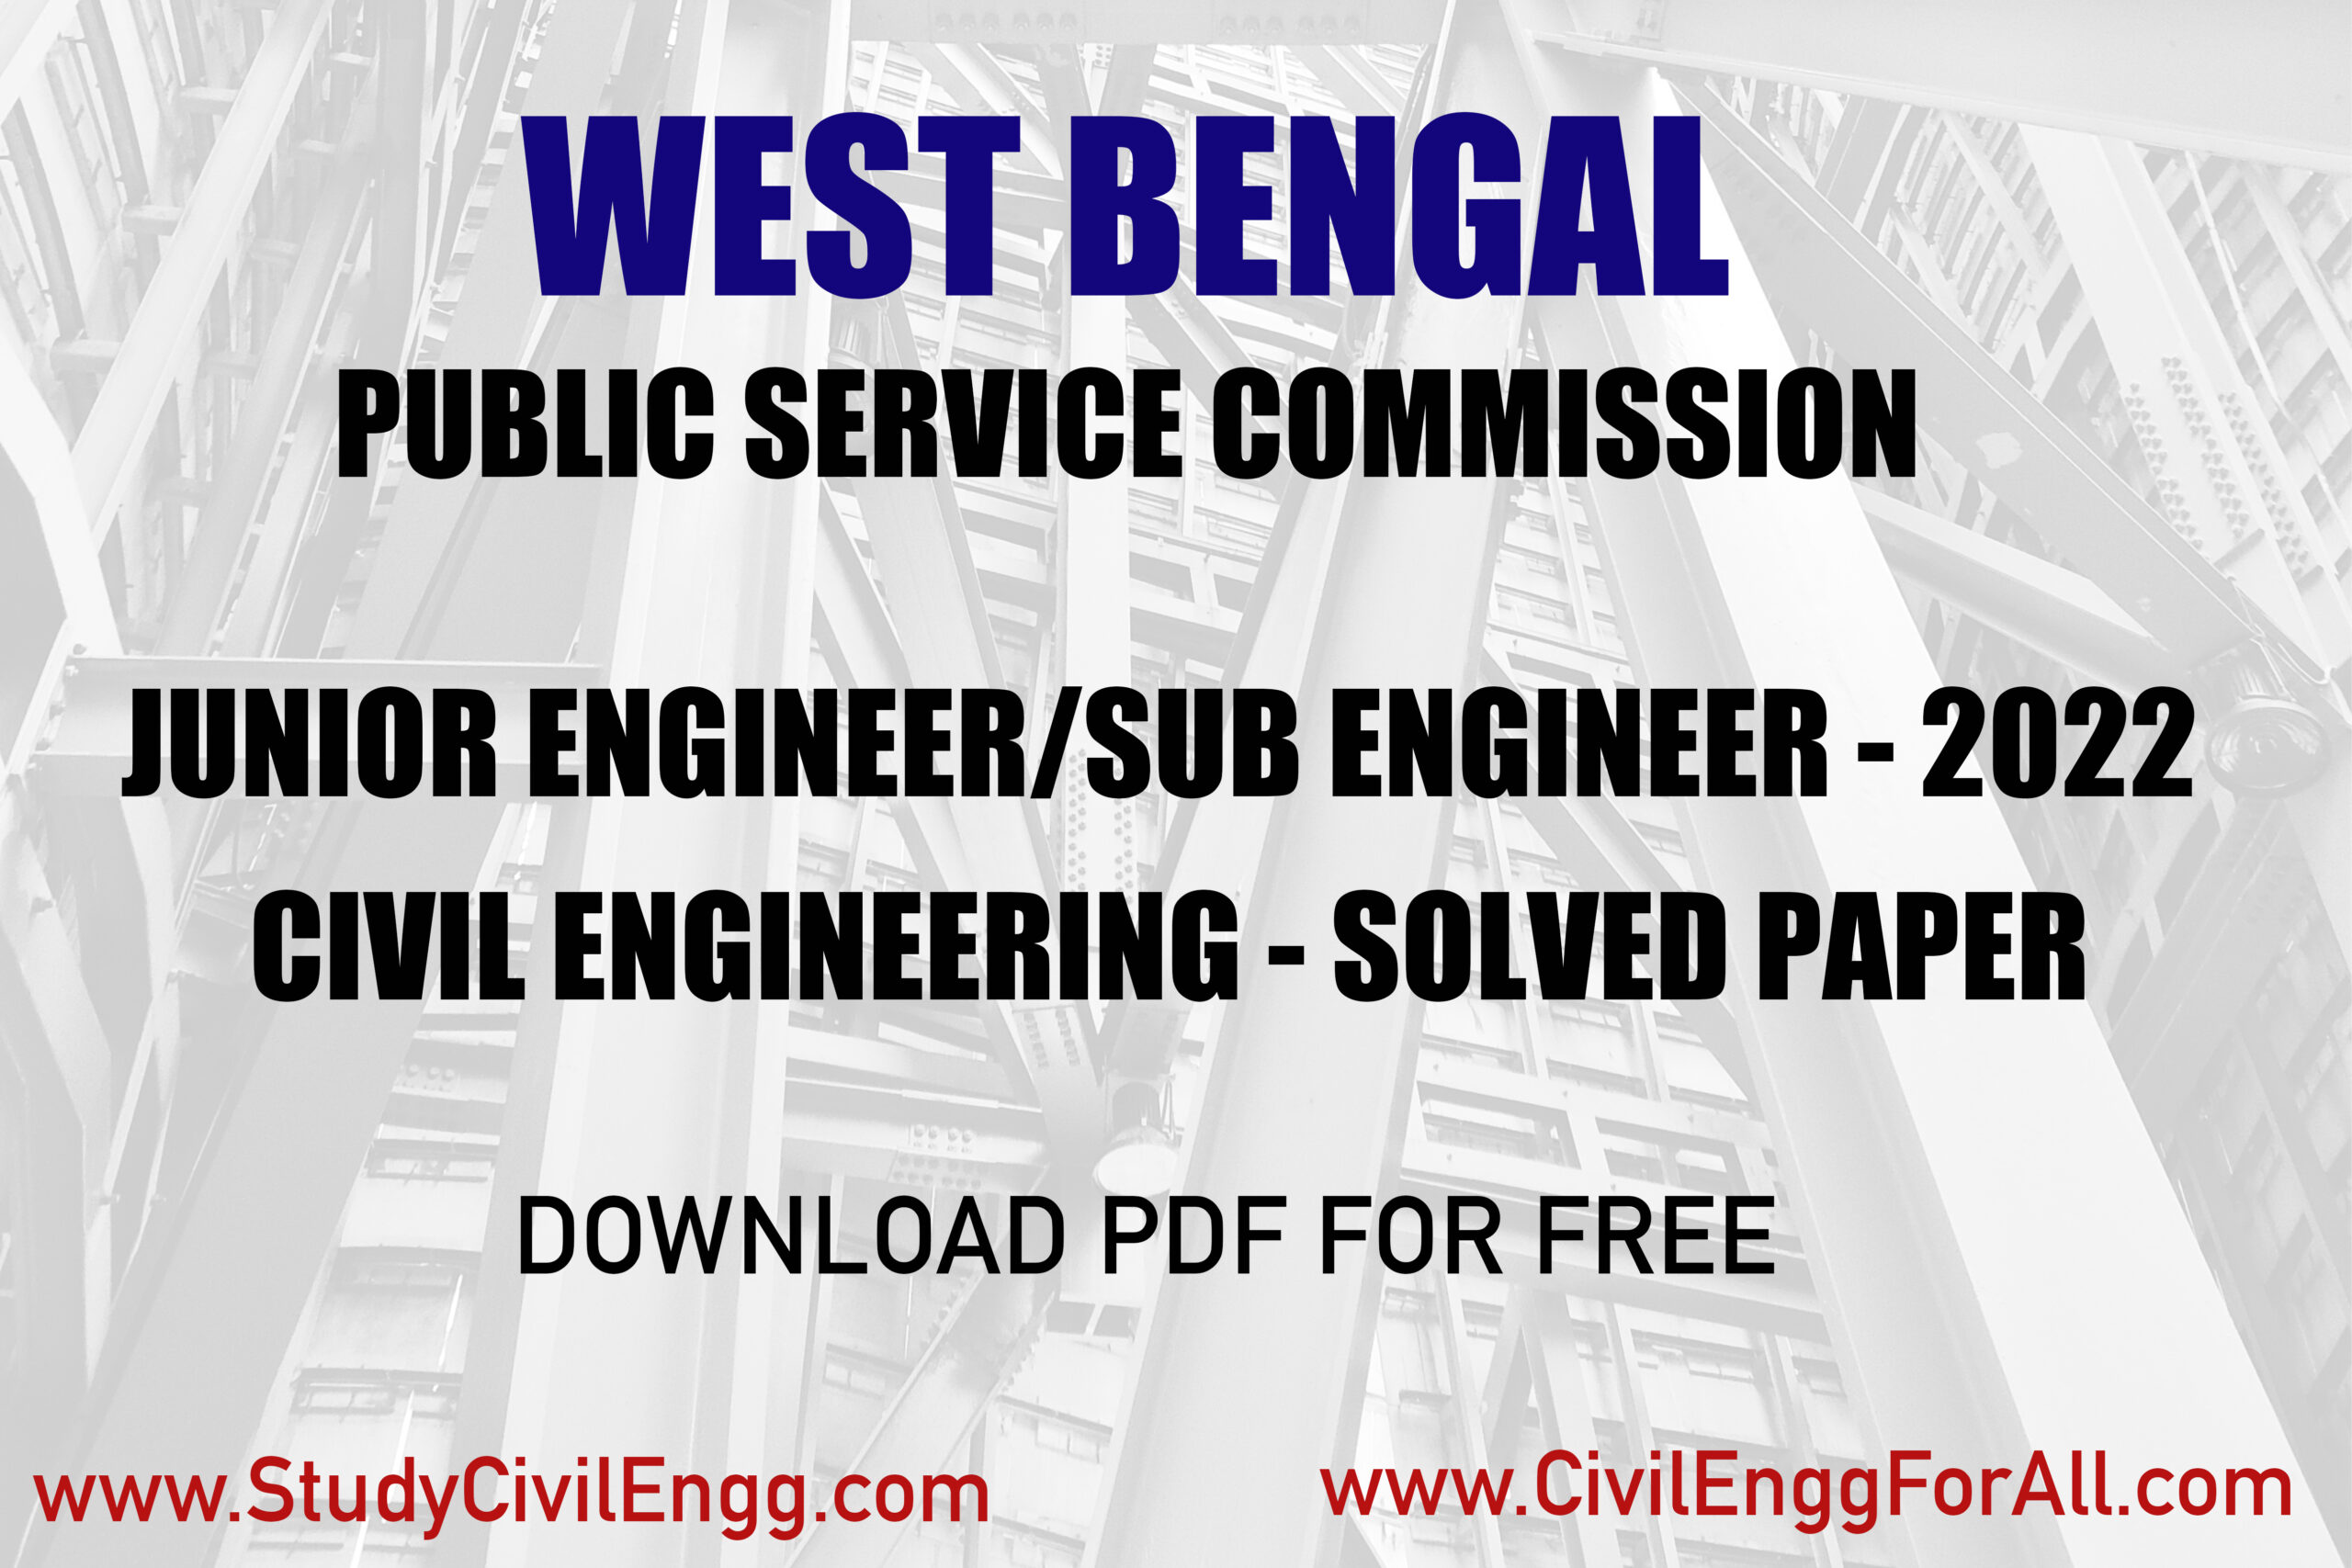 WBPSC - JEA AE Exam Solved Paper Free Download PDF - Post image